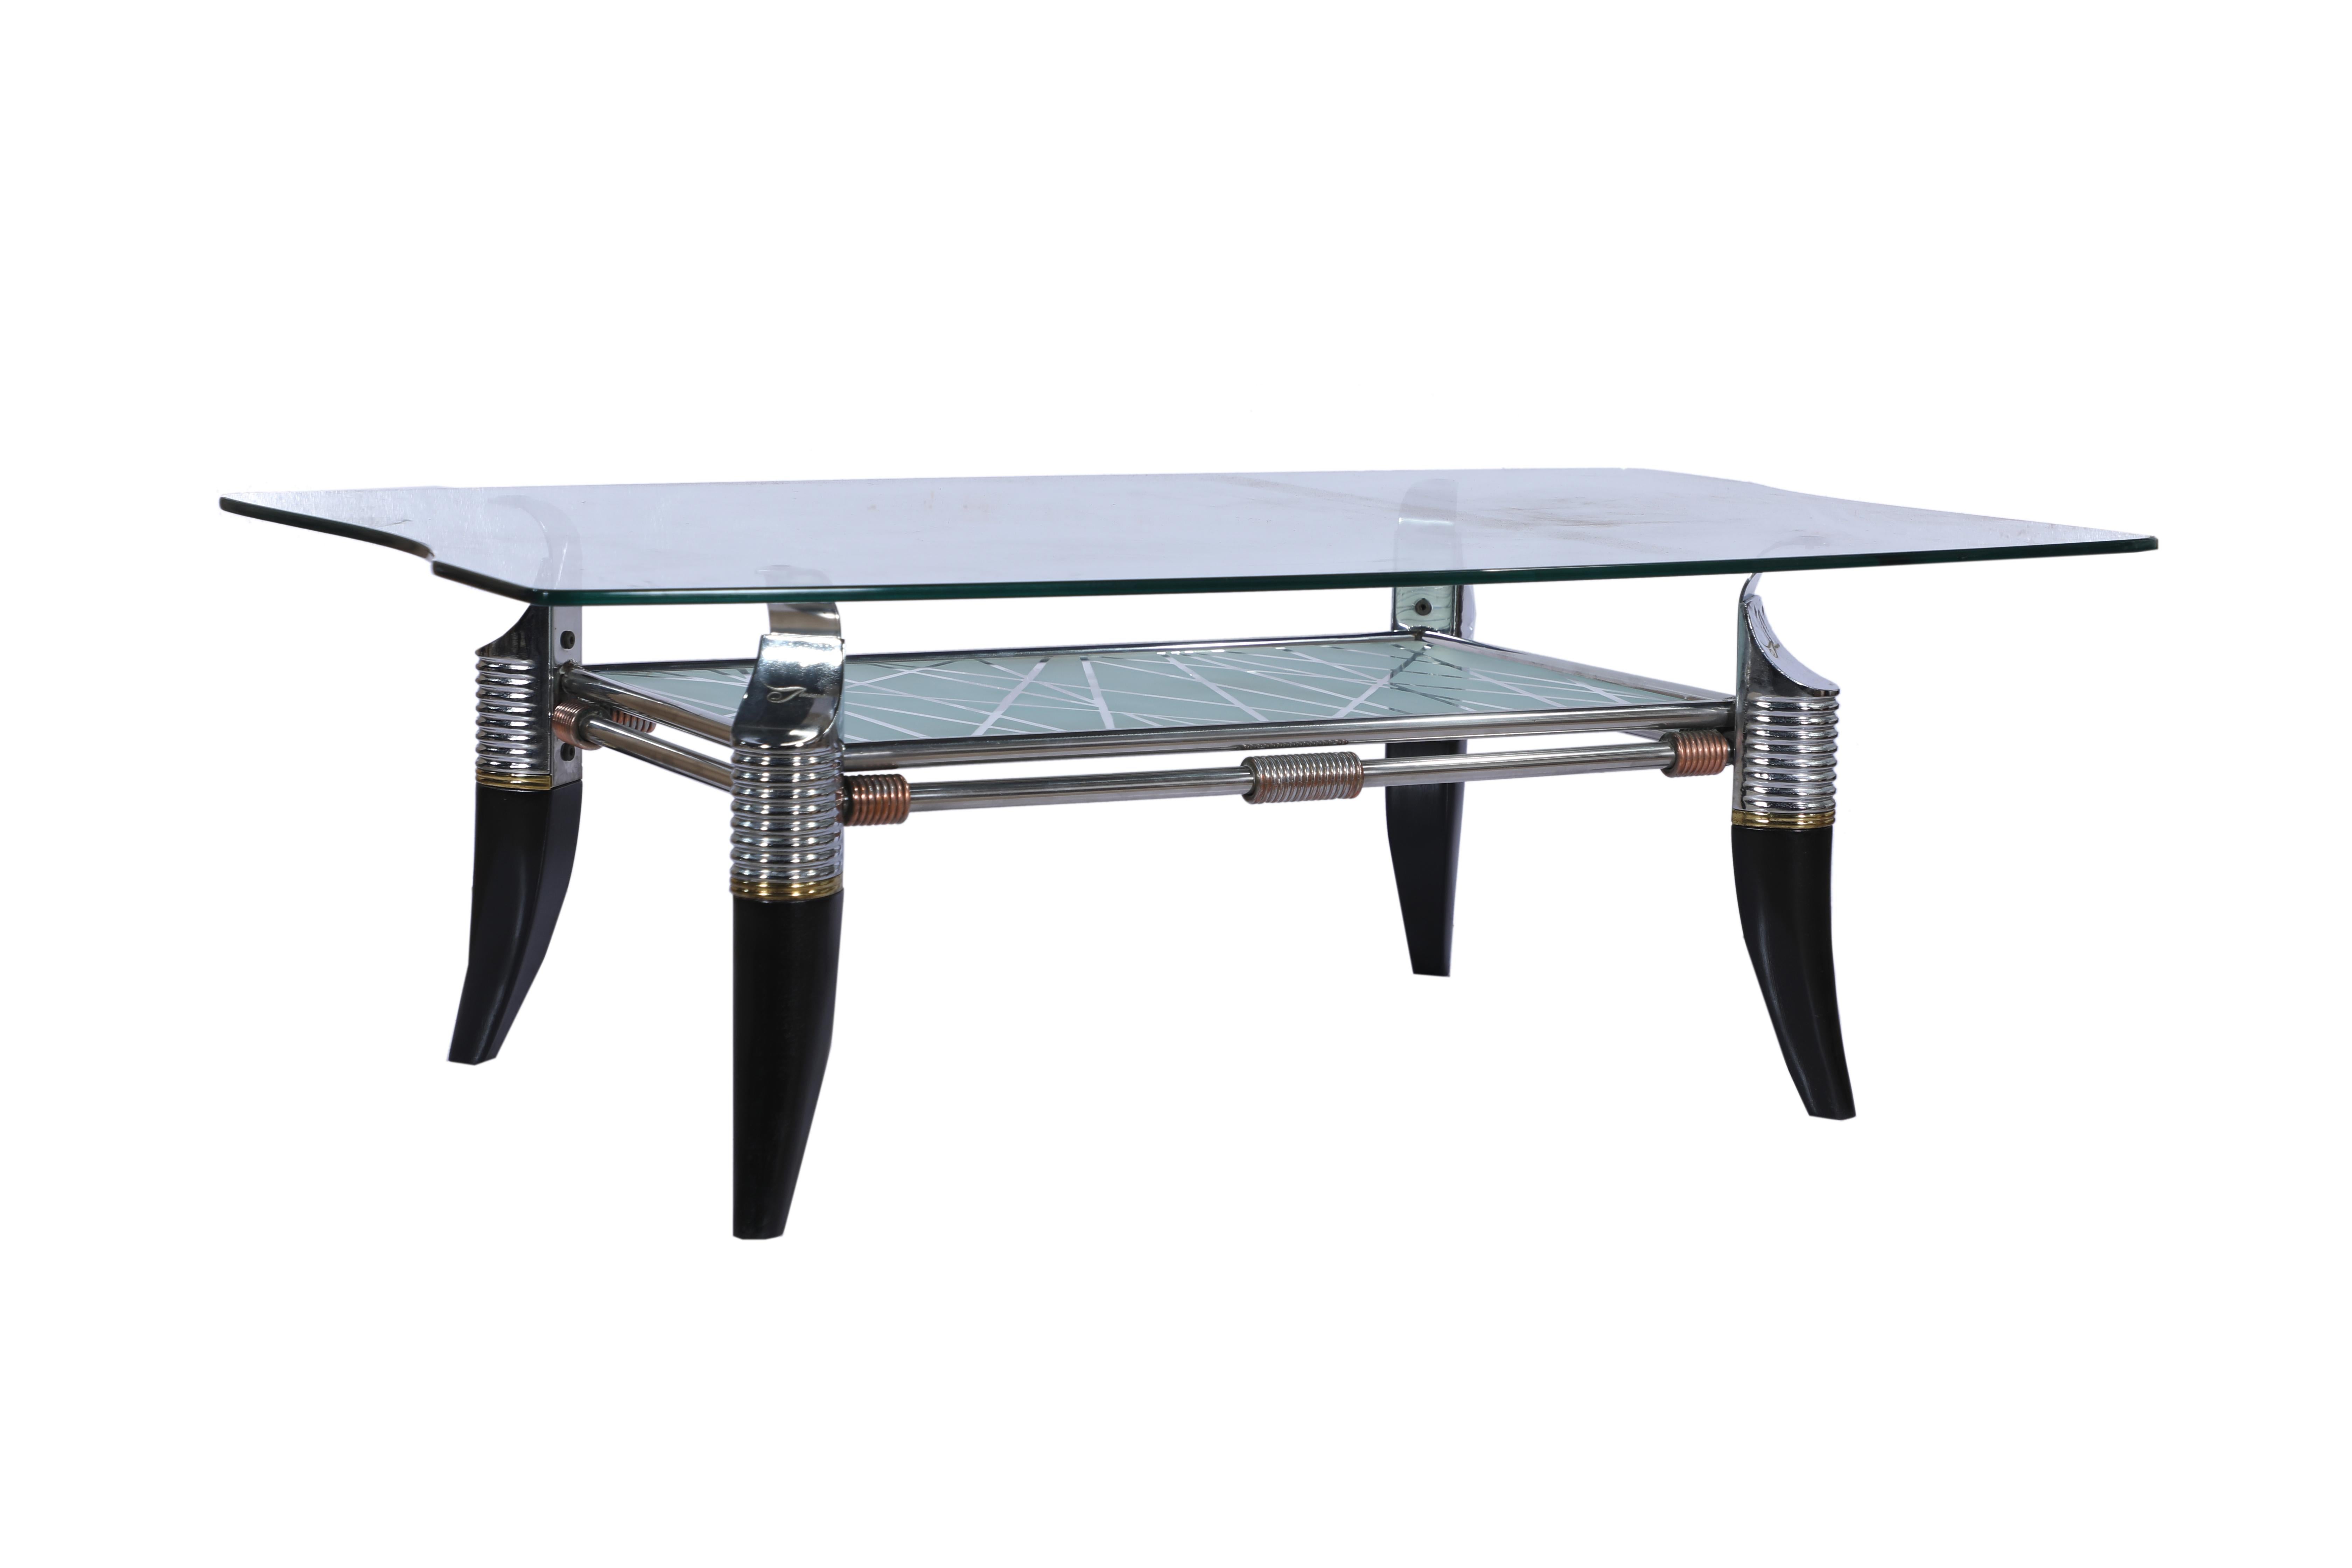 A very unusual Mid-Century Modern coffee table. It features ebonized legs in a faux Horn motif, chrome detailing with a curved glass top and etched glass second shelf. As of this writing, there is a sister piece measuring 27 x 26. Together they